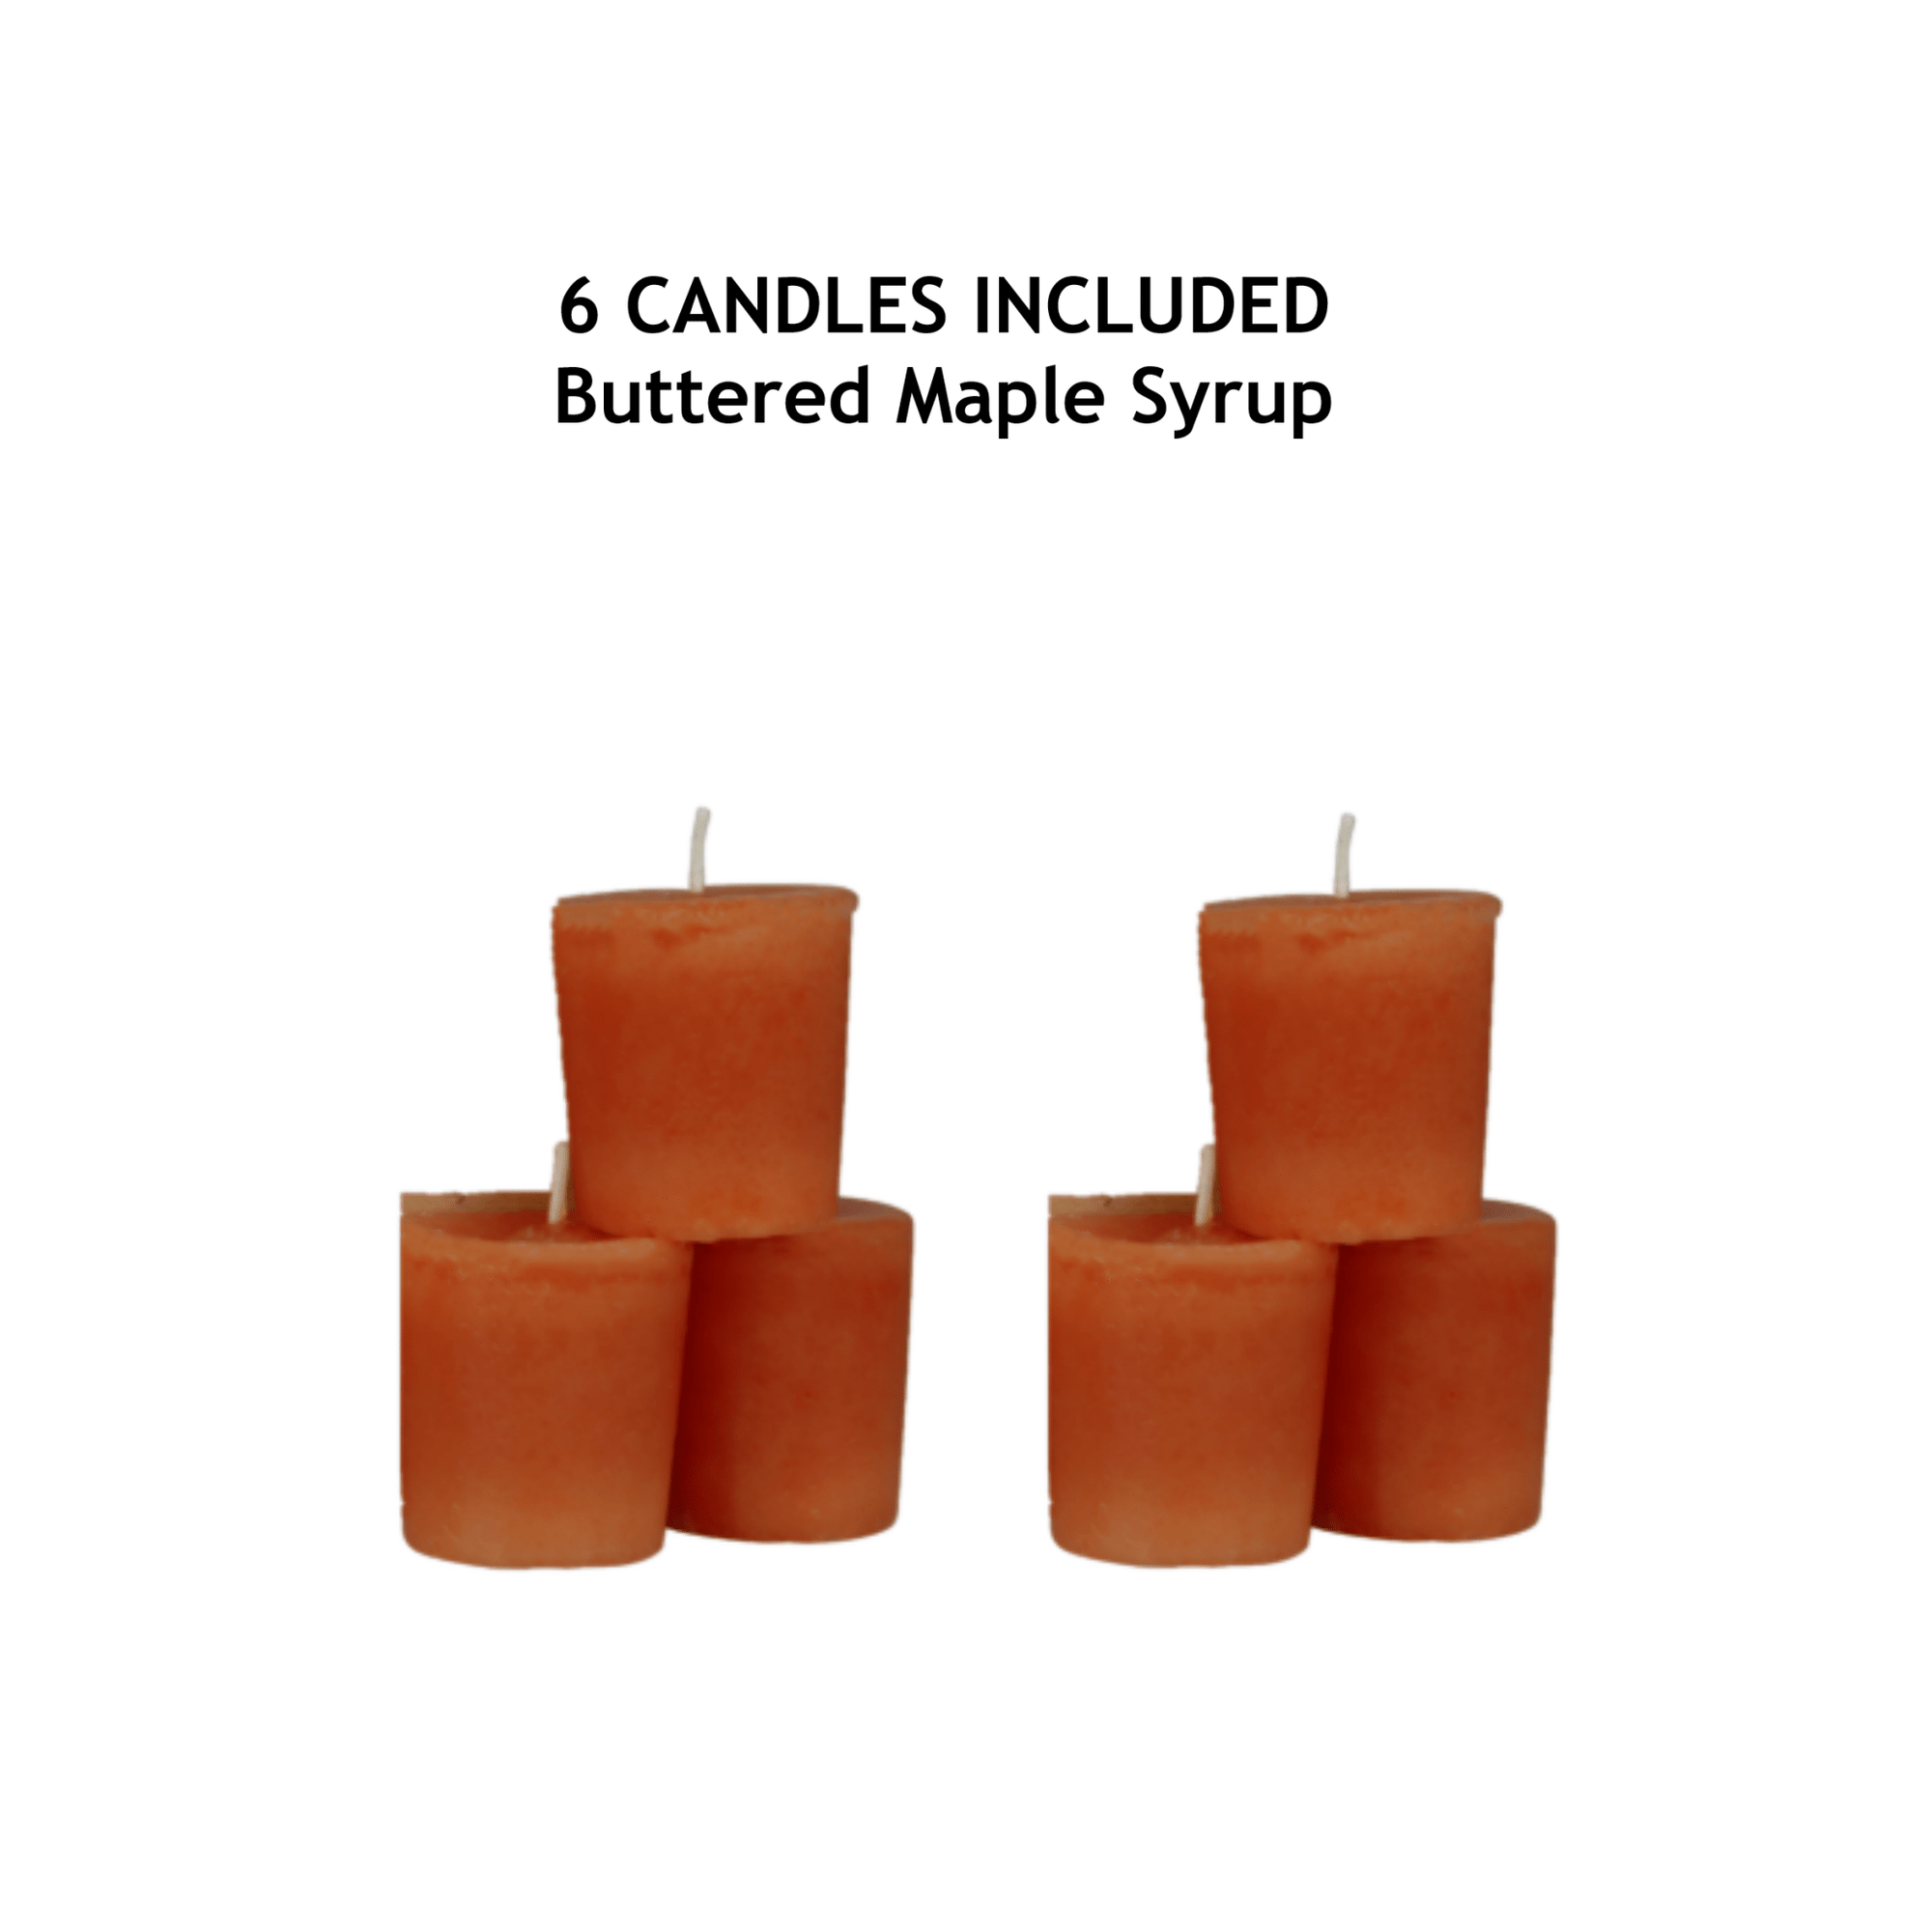 Personalized Cherry Wood Single Votive Candle Holder - 60th Wedding Anniversary - LifeSong Milestones